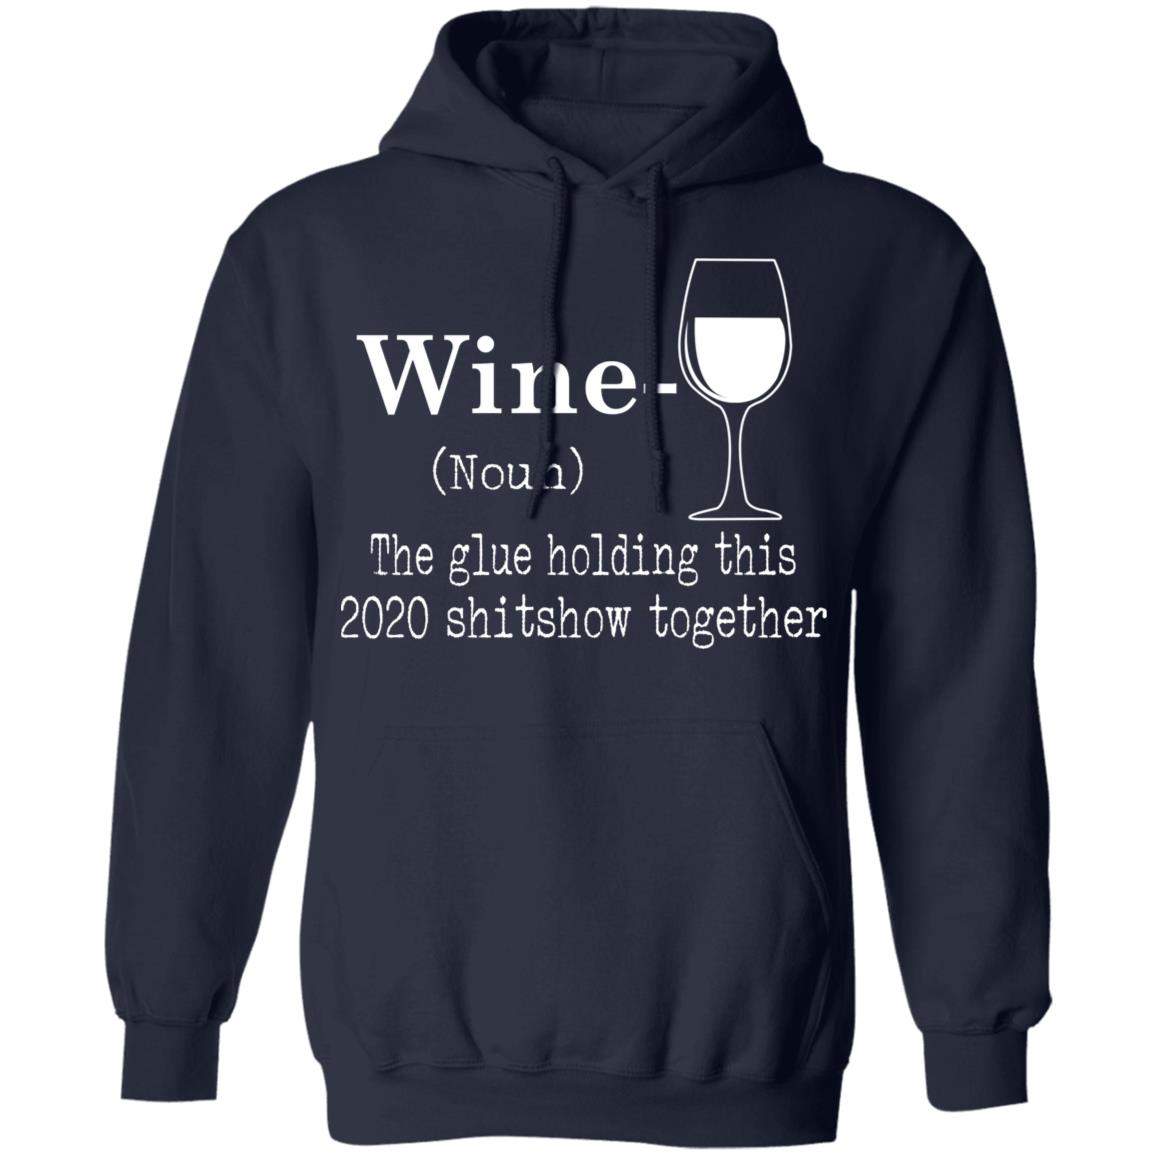 Wine - The Glue Holding This 2020 Shitshow Together Shirt